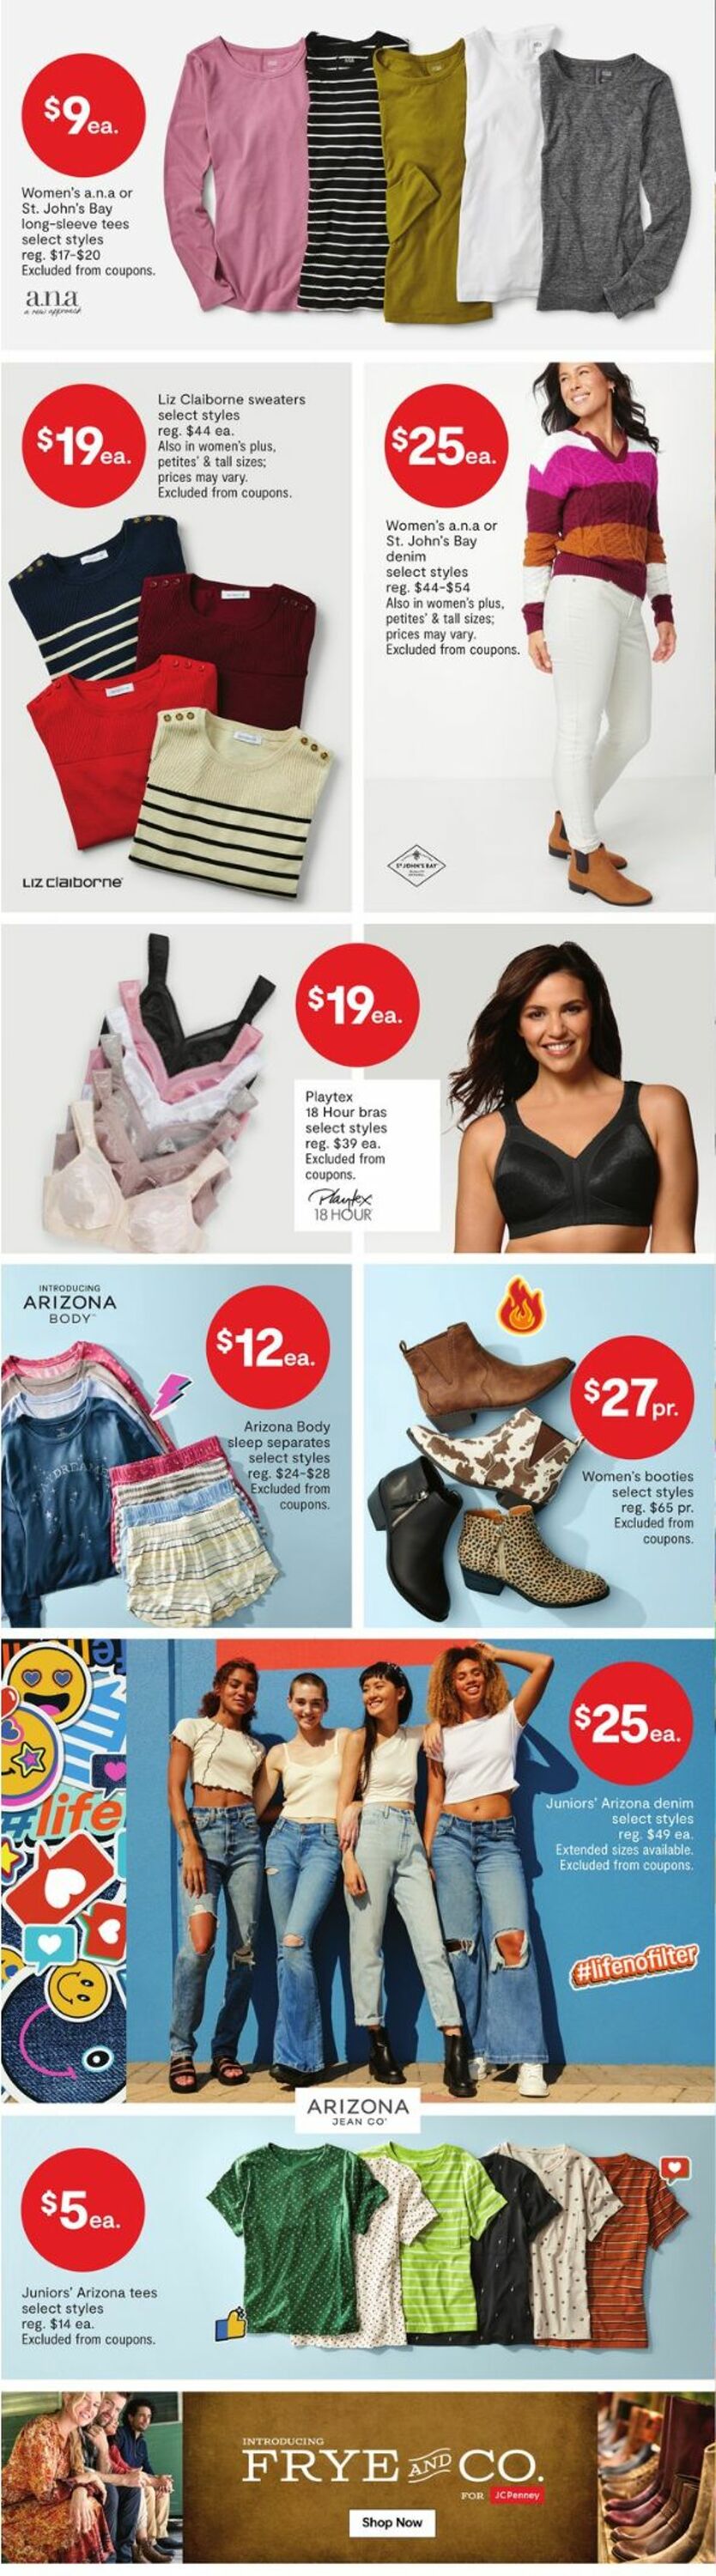 JCPenney Weekly ADs